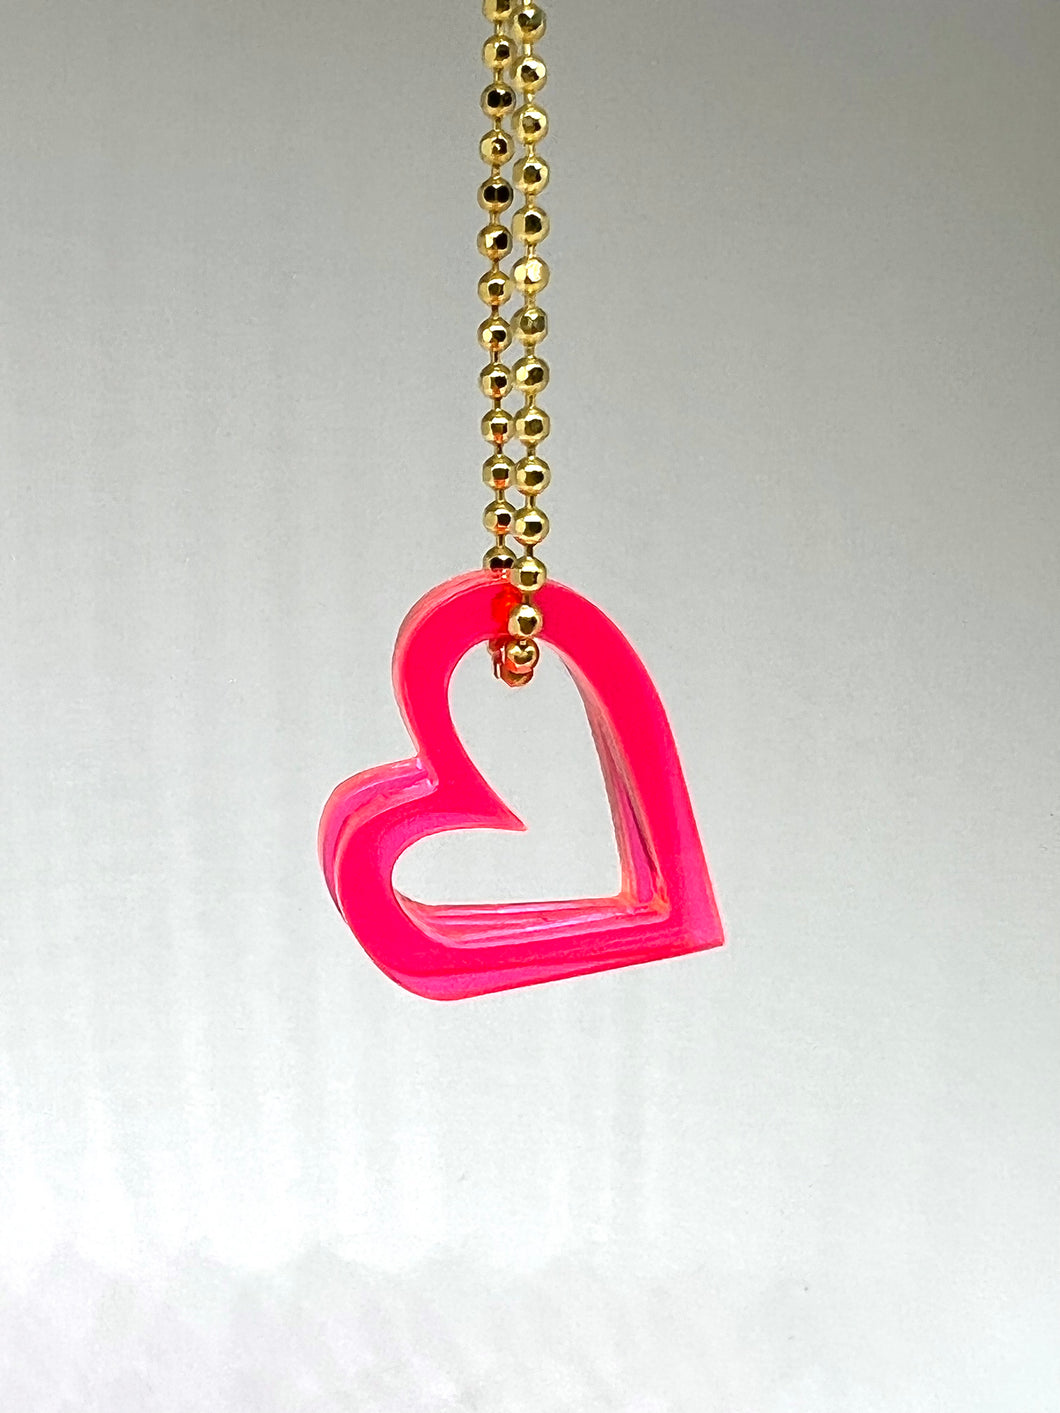 Necklace with hot pink Hearts